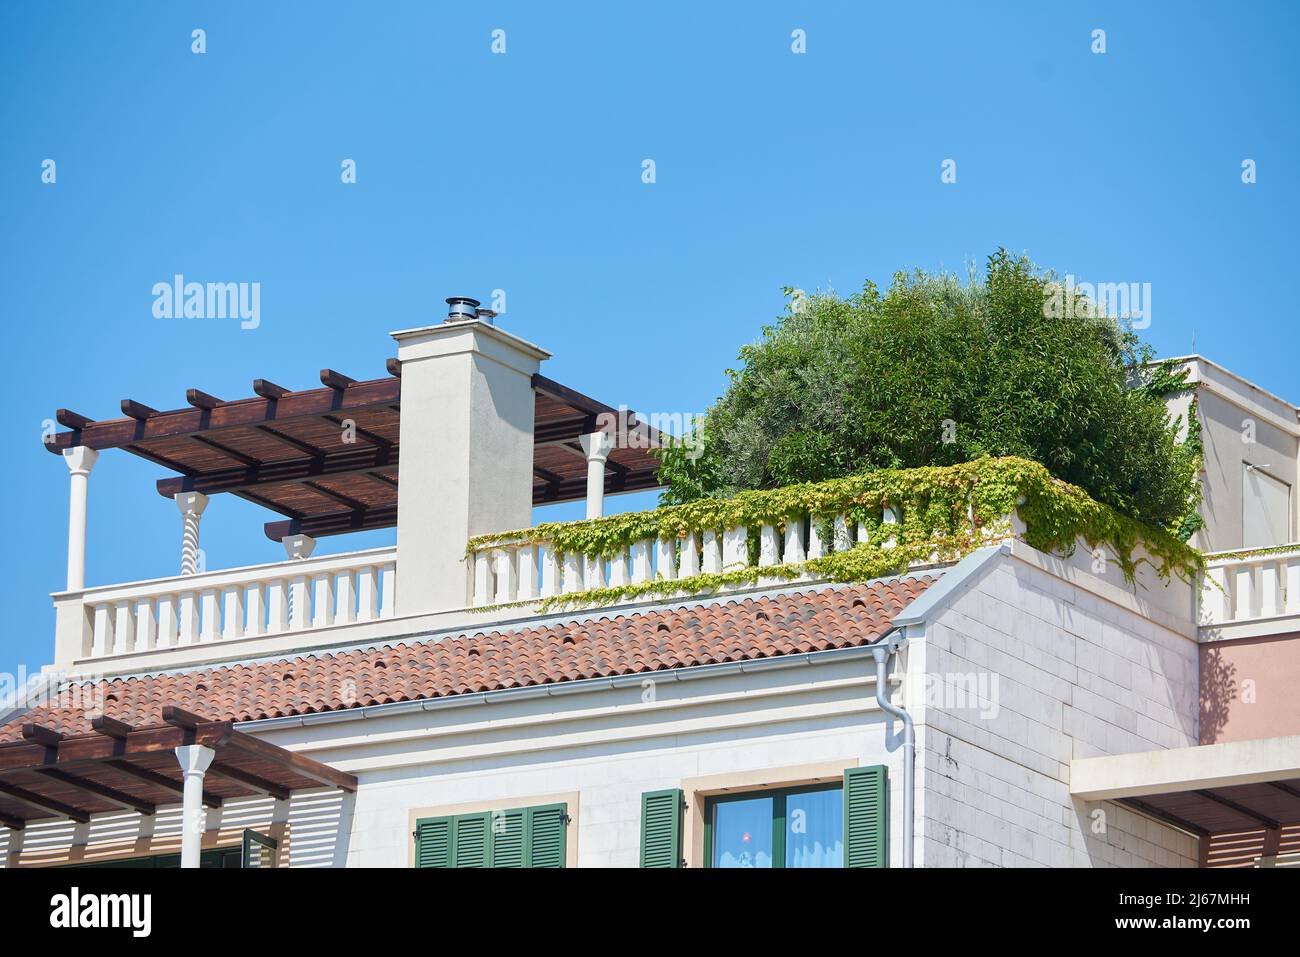 Roof patio with plants decoration in a modern high tech house Stock Photo